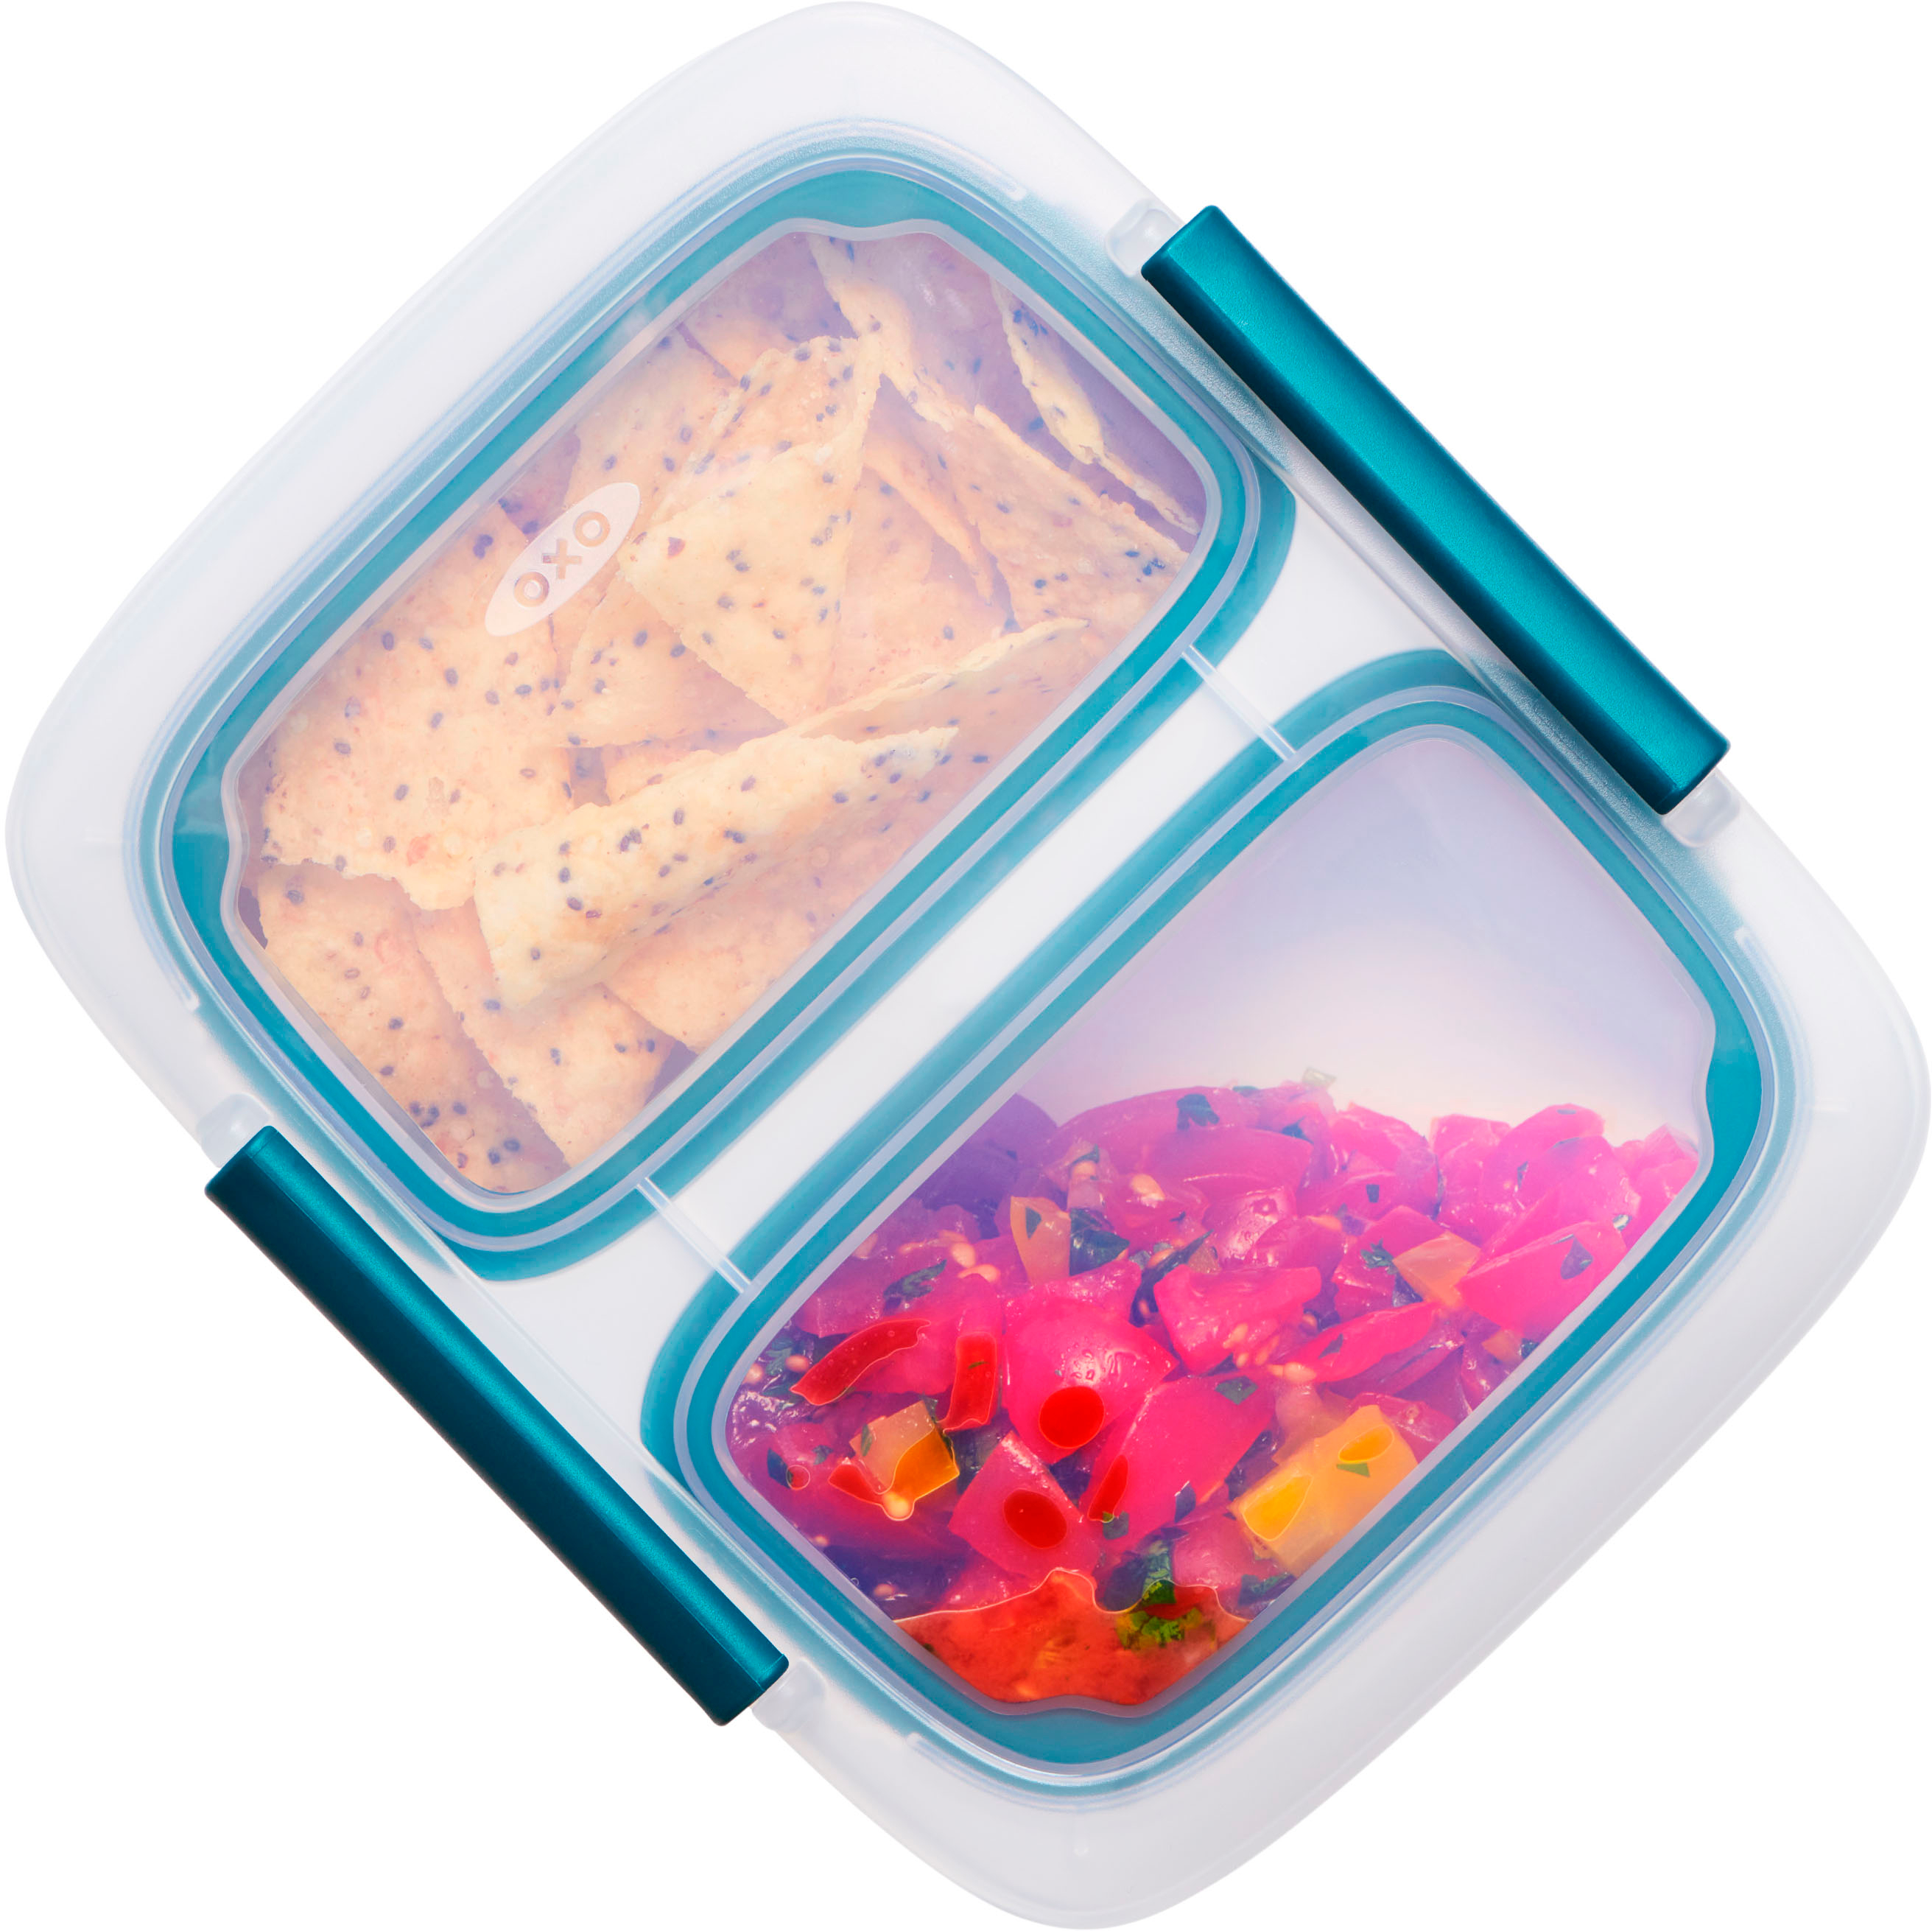 OXO Good Grips Prep & Go 10-Piece Leakproof Container Set